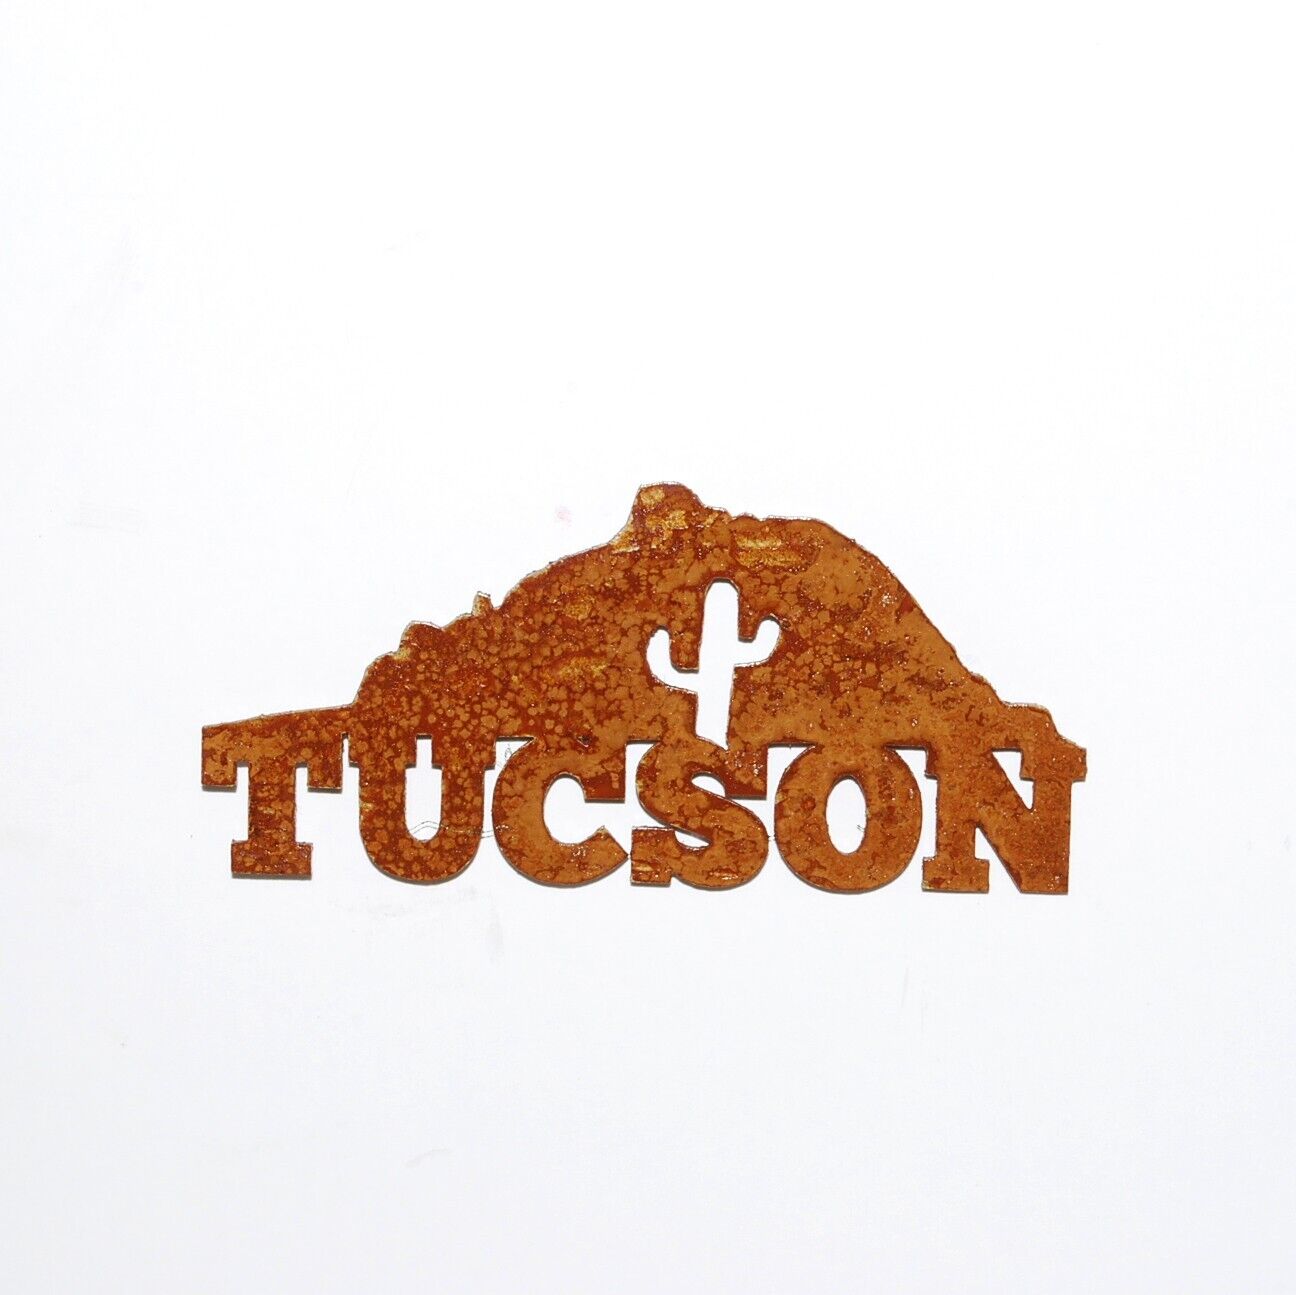 Tucson City Classic Souvenir Refrigerator Magnet in Rusted Patina Finish